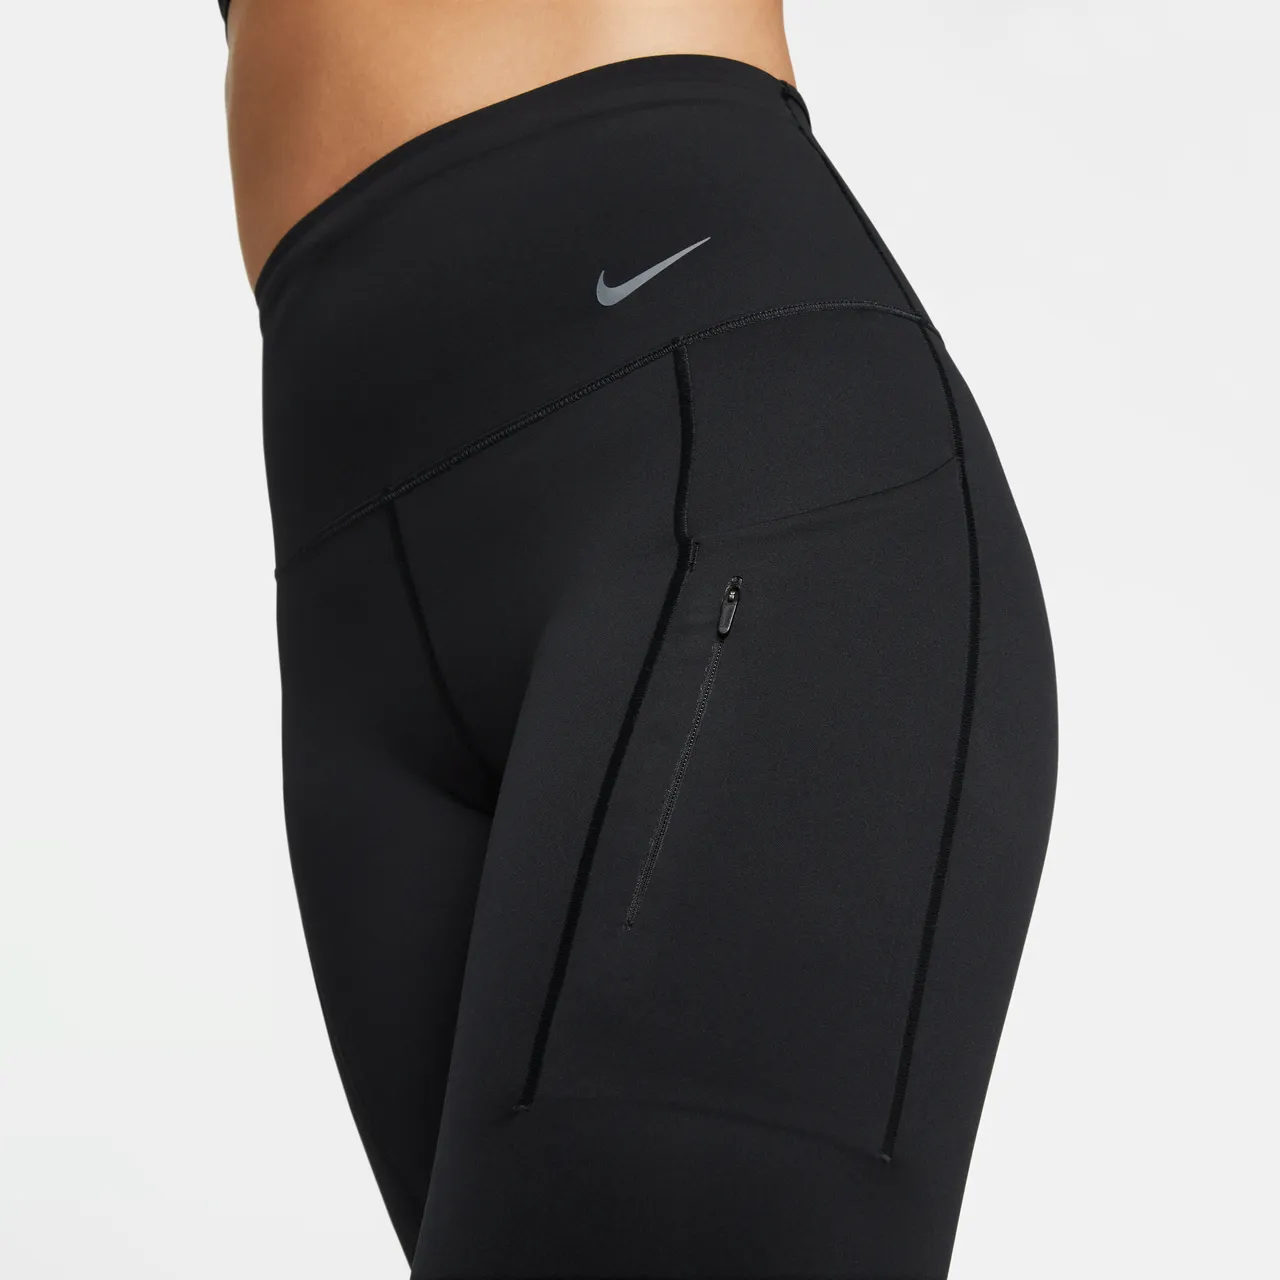 Nike Go Women's Firm-Support High-Waisted 7/8 Leggings with Pockets - Black - Nylon